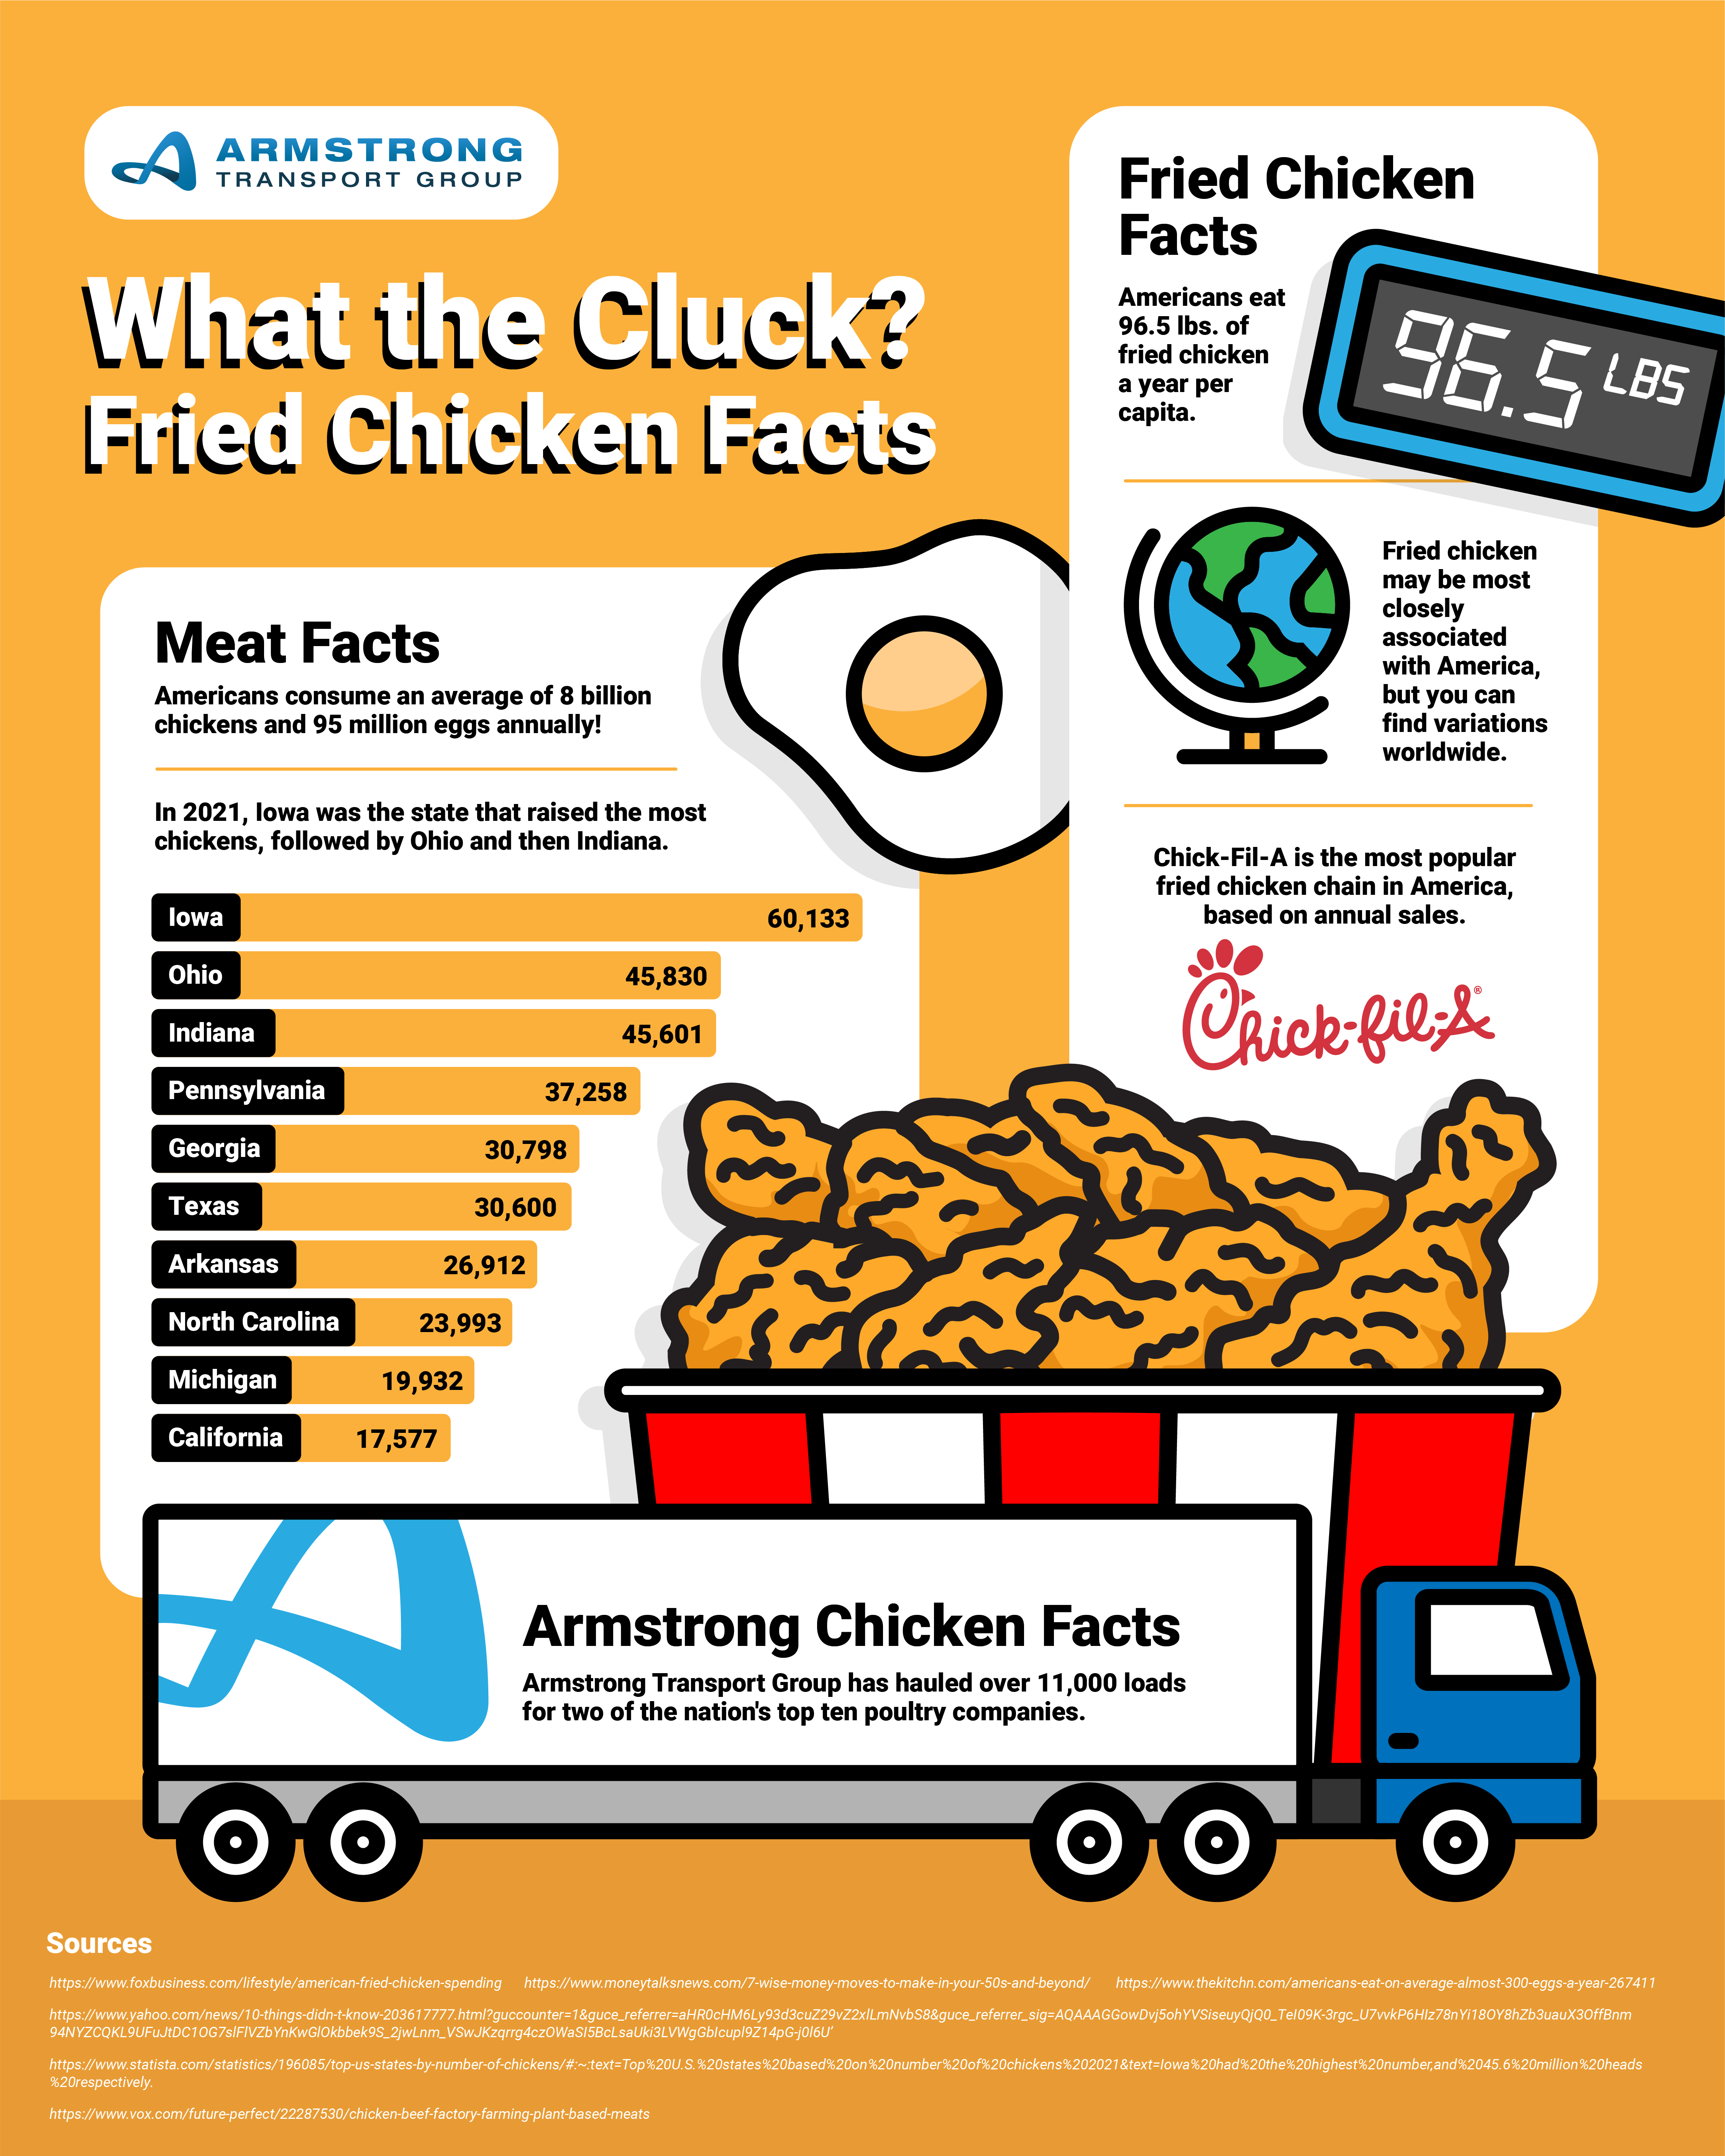 3395_National Fried Chicken Day Facts_D1R4_Final